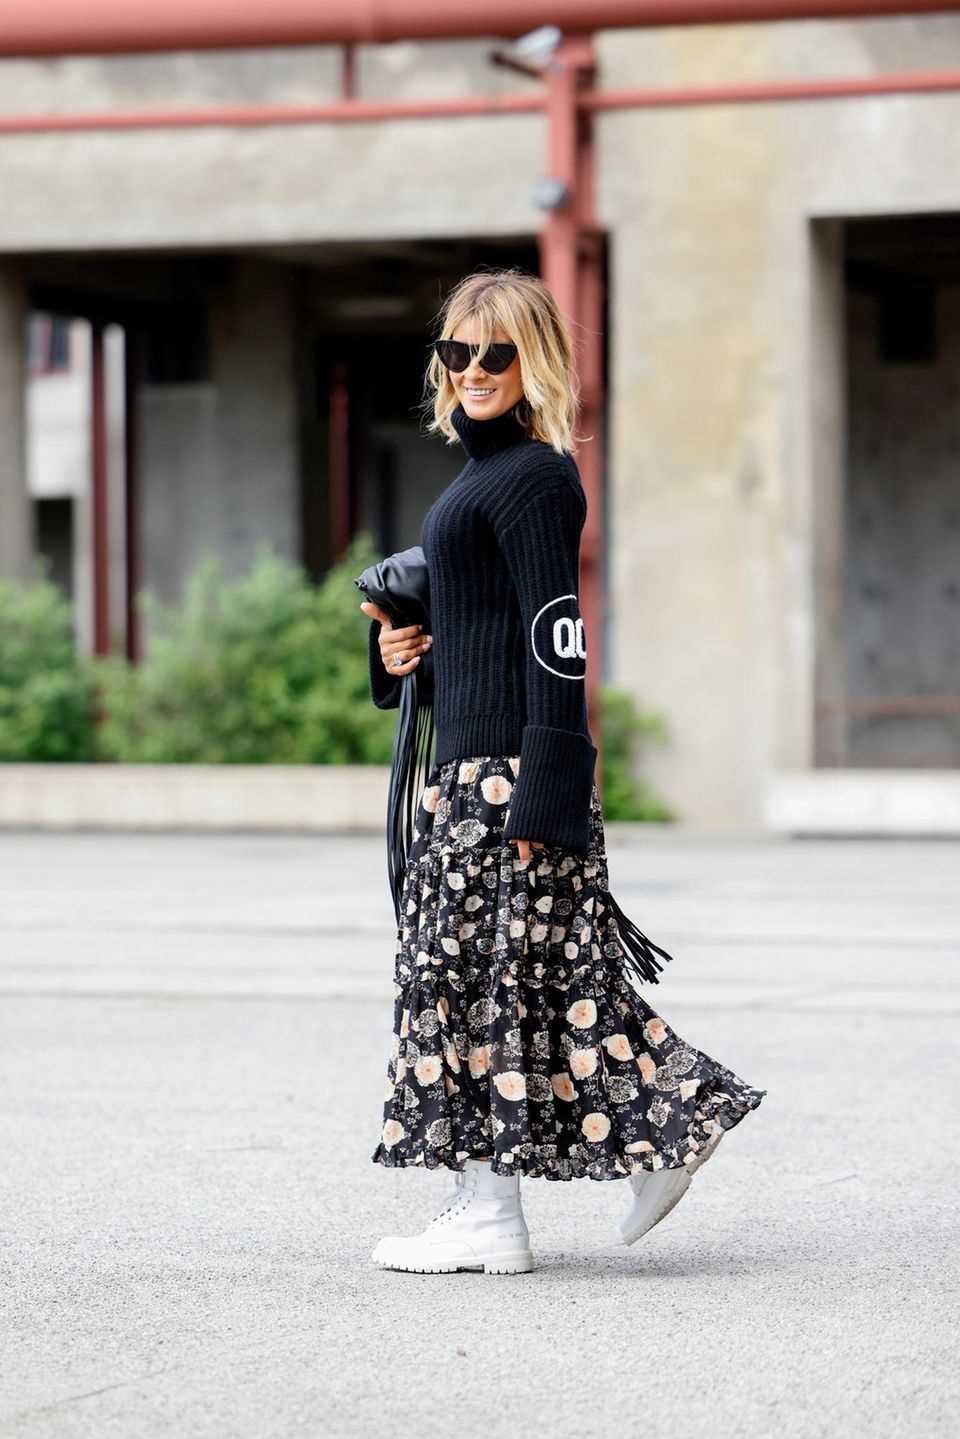 Floral skirt: woman wears a black sweater and a skirt with a floral pattern